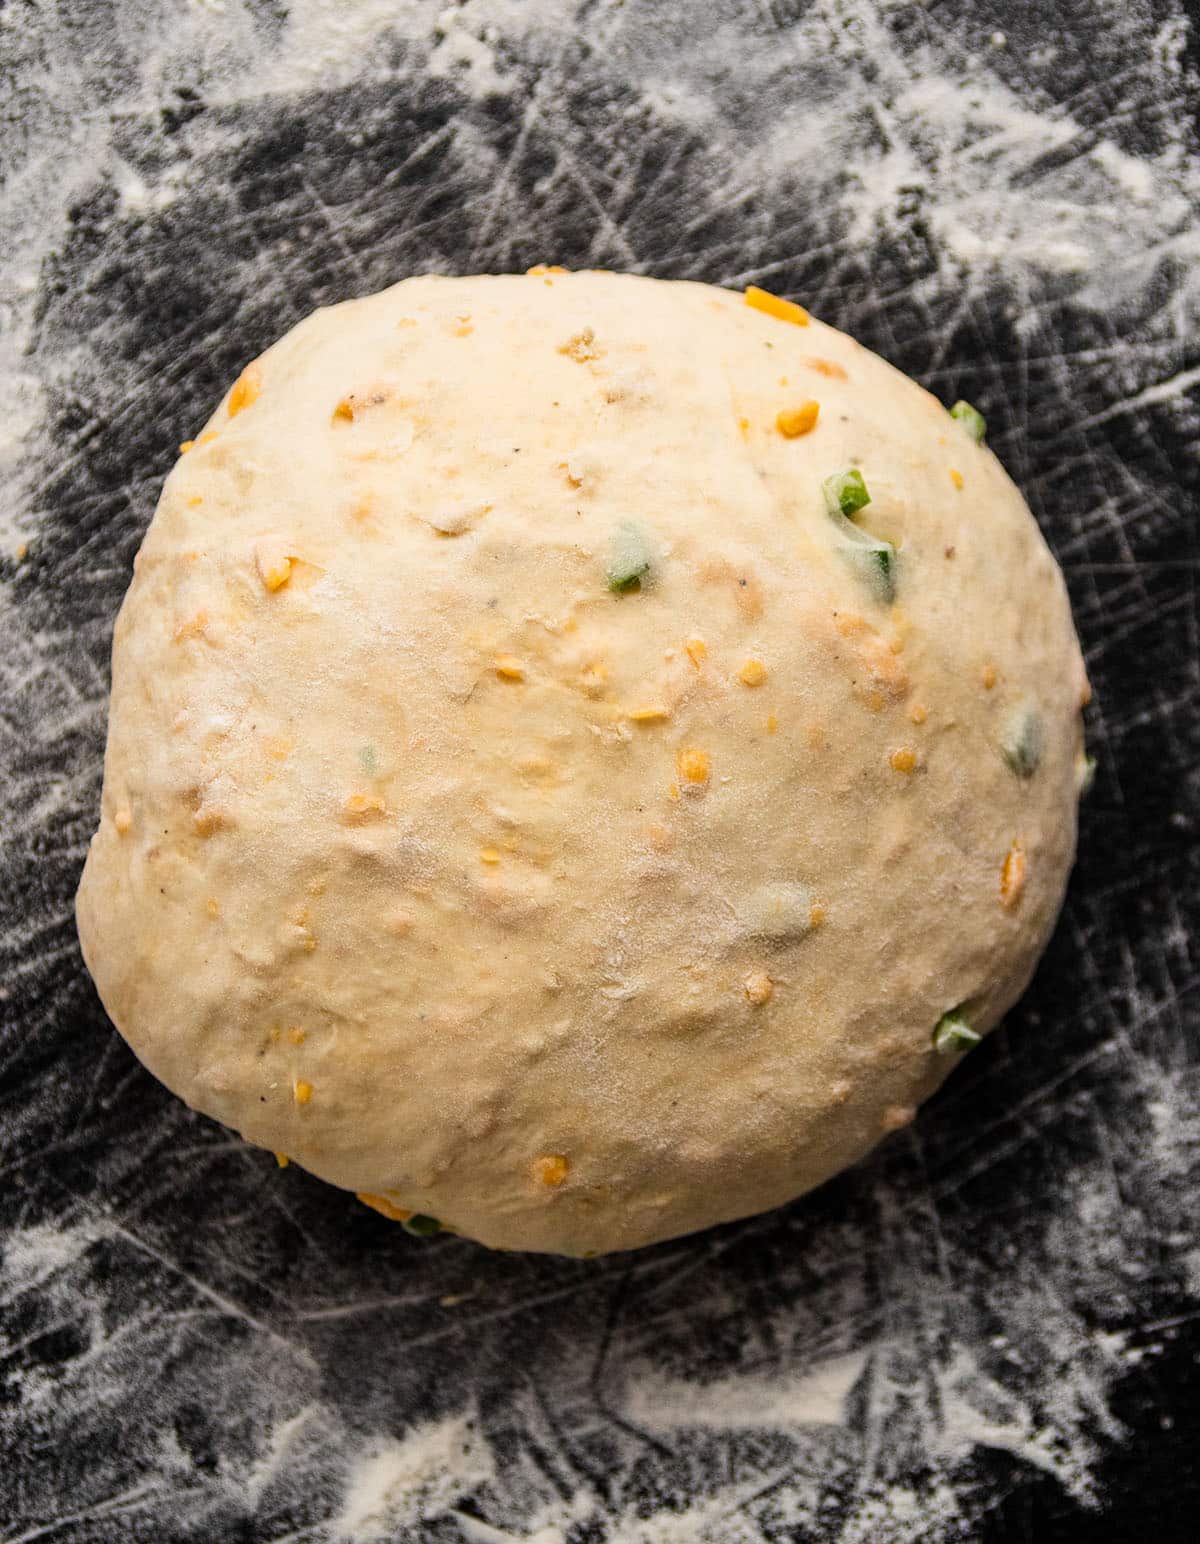 Jalapeno cheese dough, shaped into a round loaf on a black cutting board.